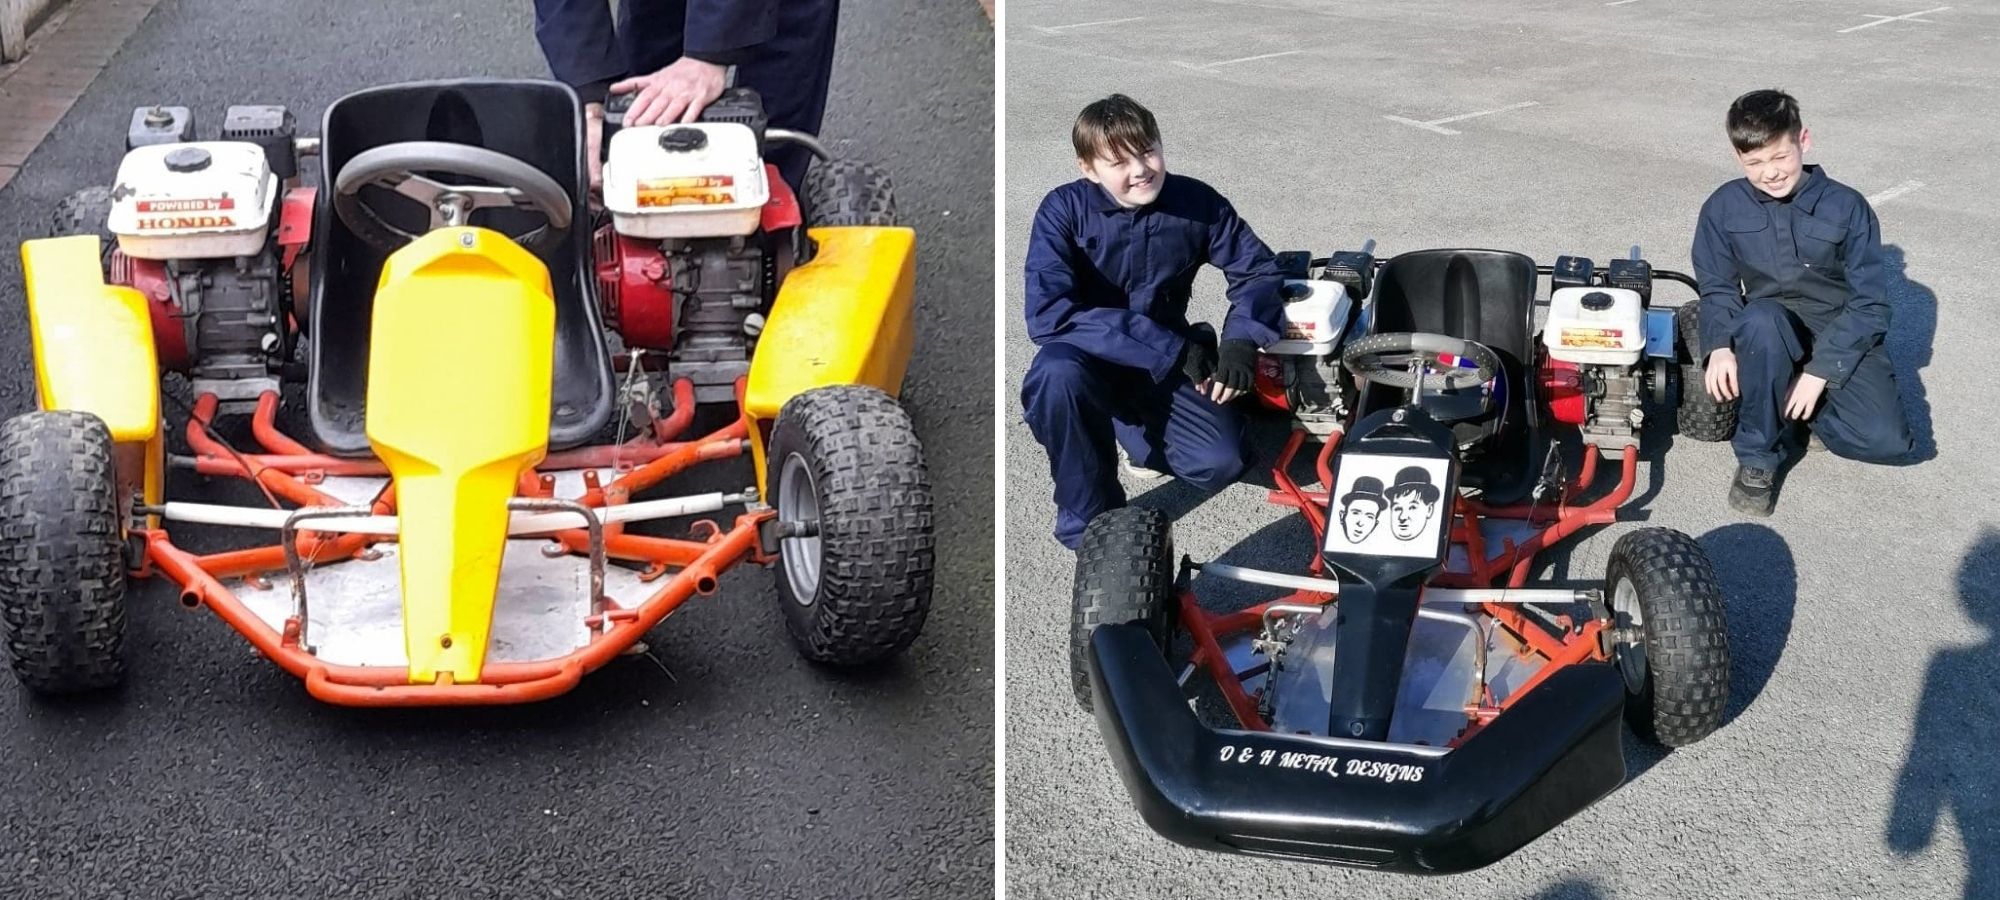 Before and after photos show the transformation of the go-kart courtesy of Ollie and Harvey. 